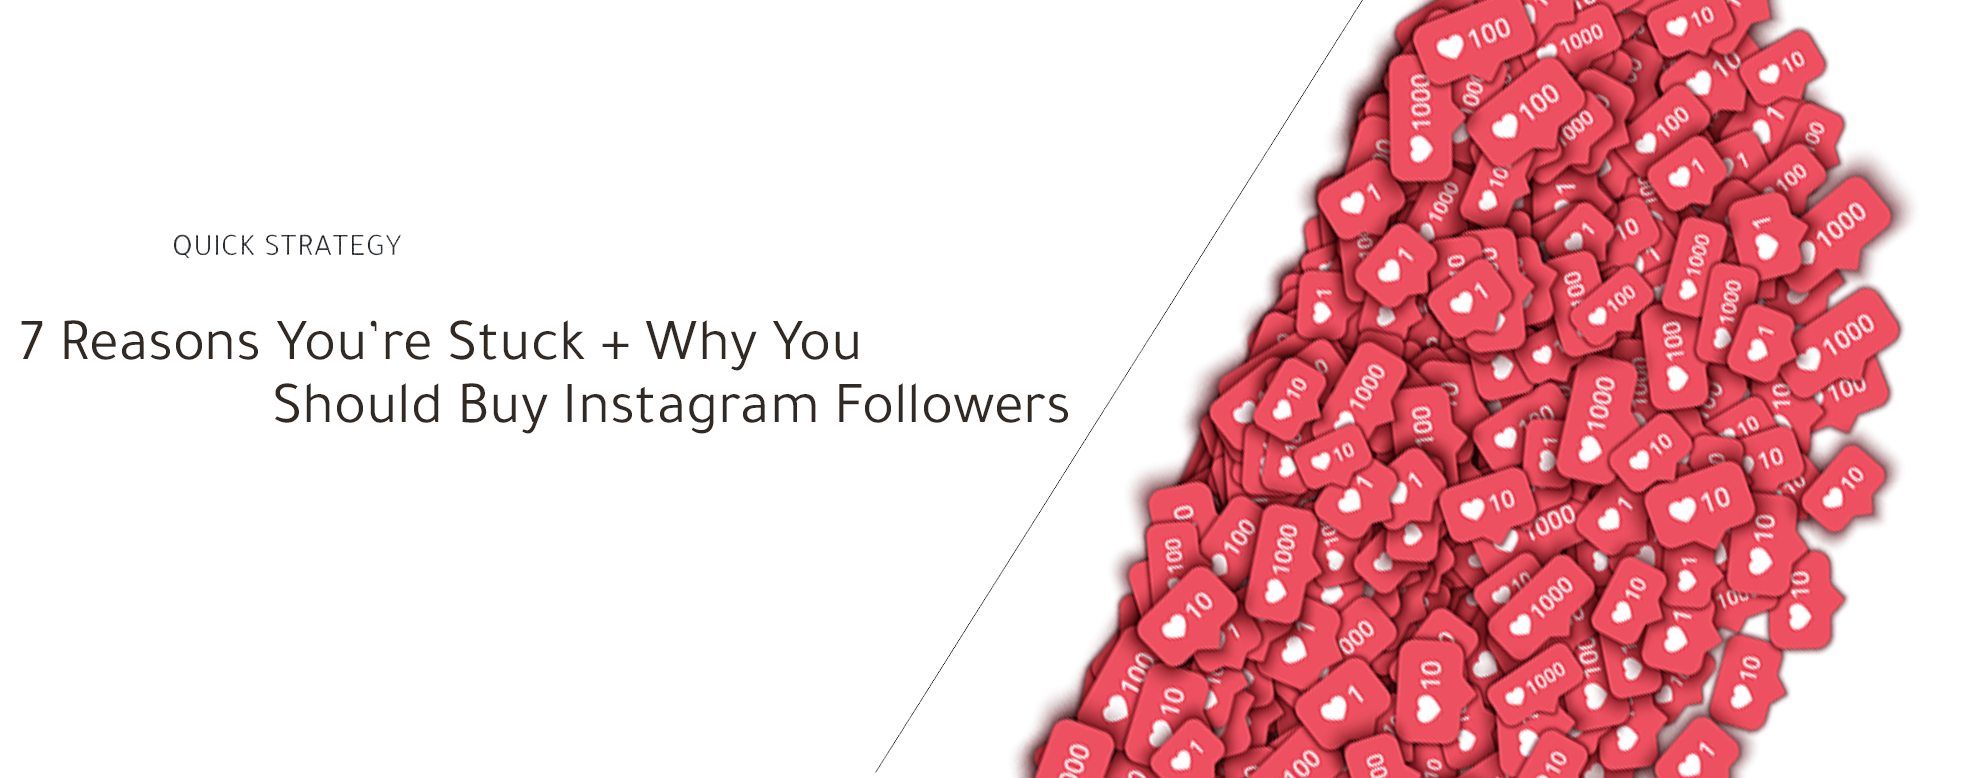 7 Reasons Why You're Stuck & How Buying Instagram Followers Can Help You Grow